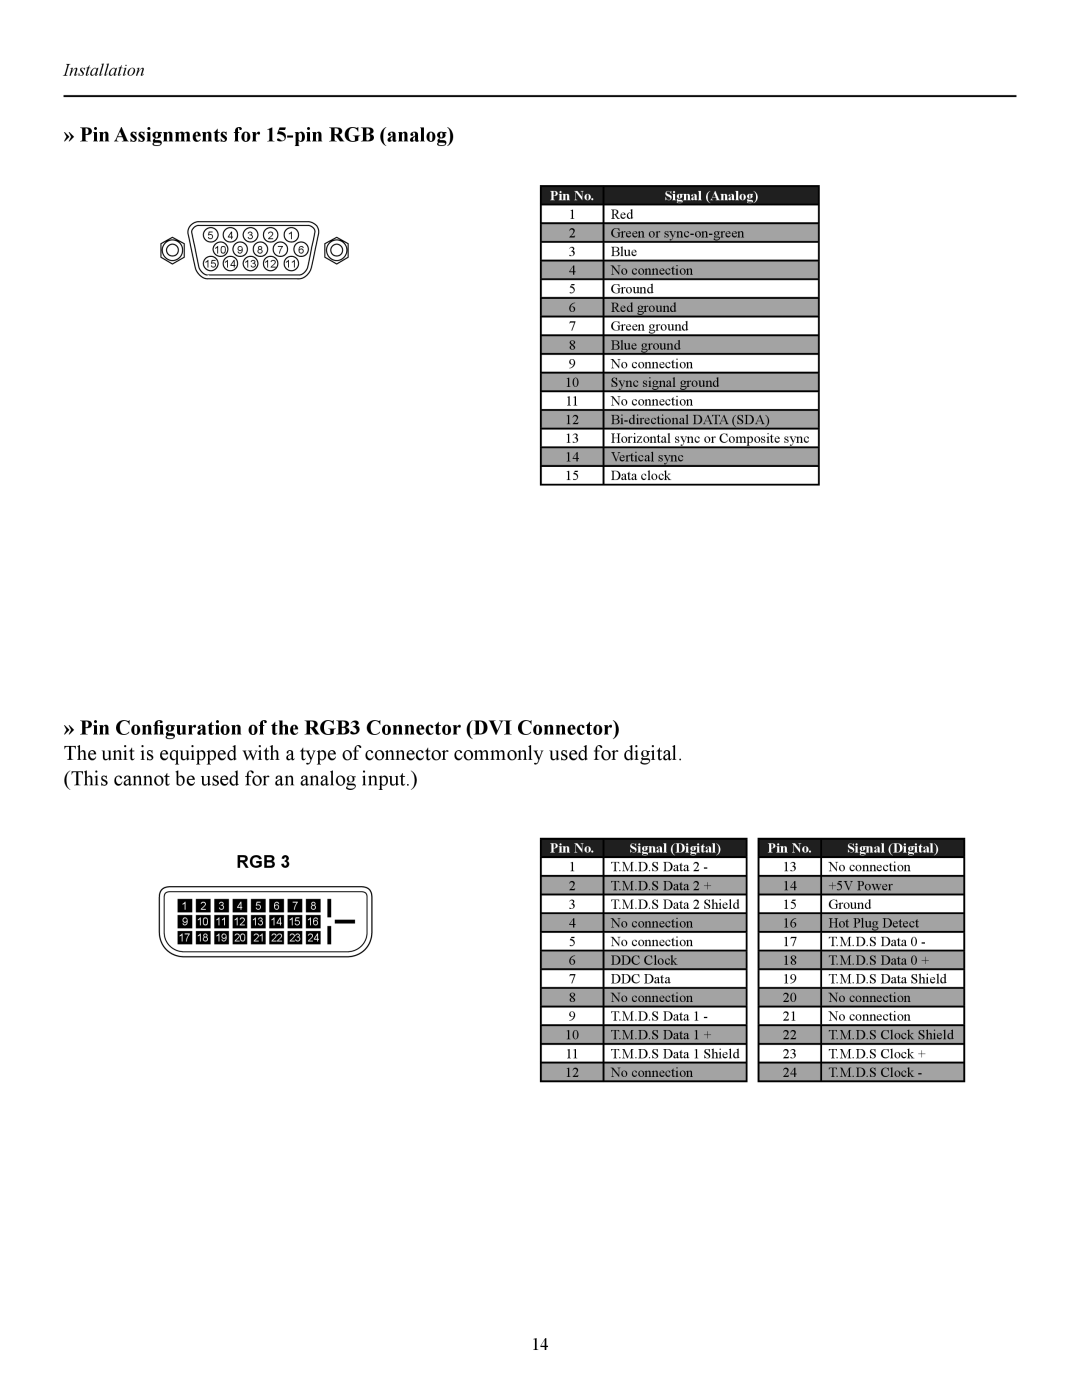 Runco CW-42i » Pin Assignments for 15-pin RGB analog, » Pin Conﬁguration of the RGB3 Connector DVI Connector, Installation 